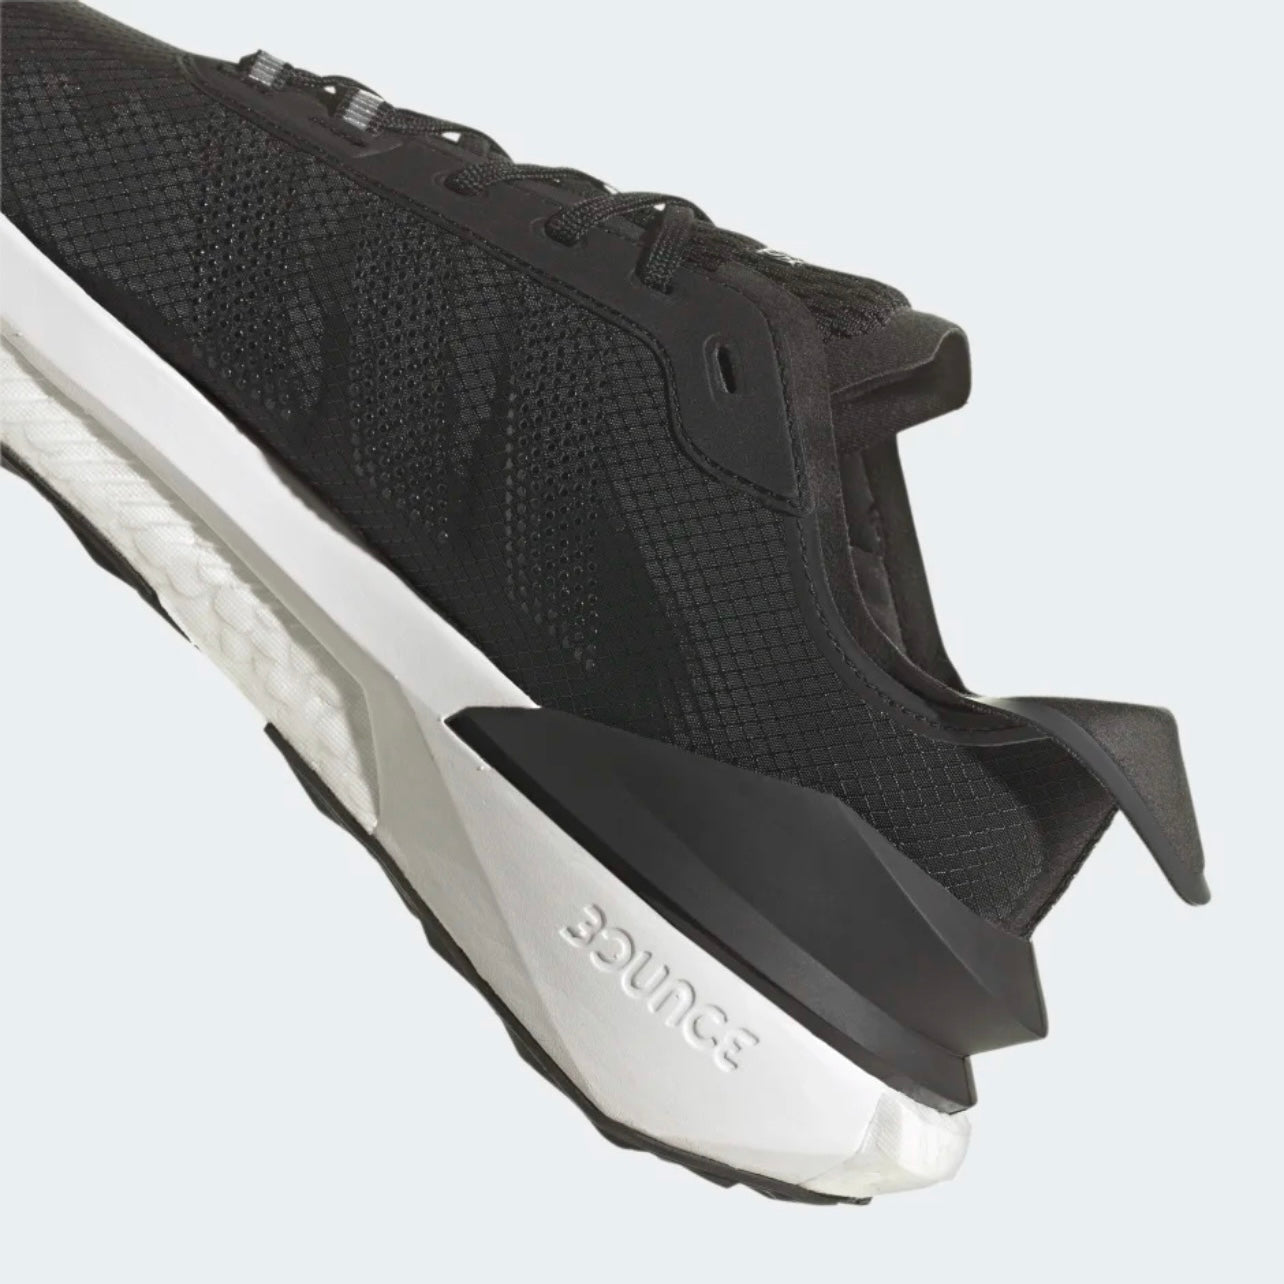 Adidas sneakers for men (HP5962)in black and white